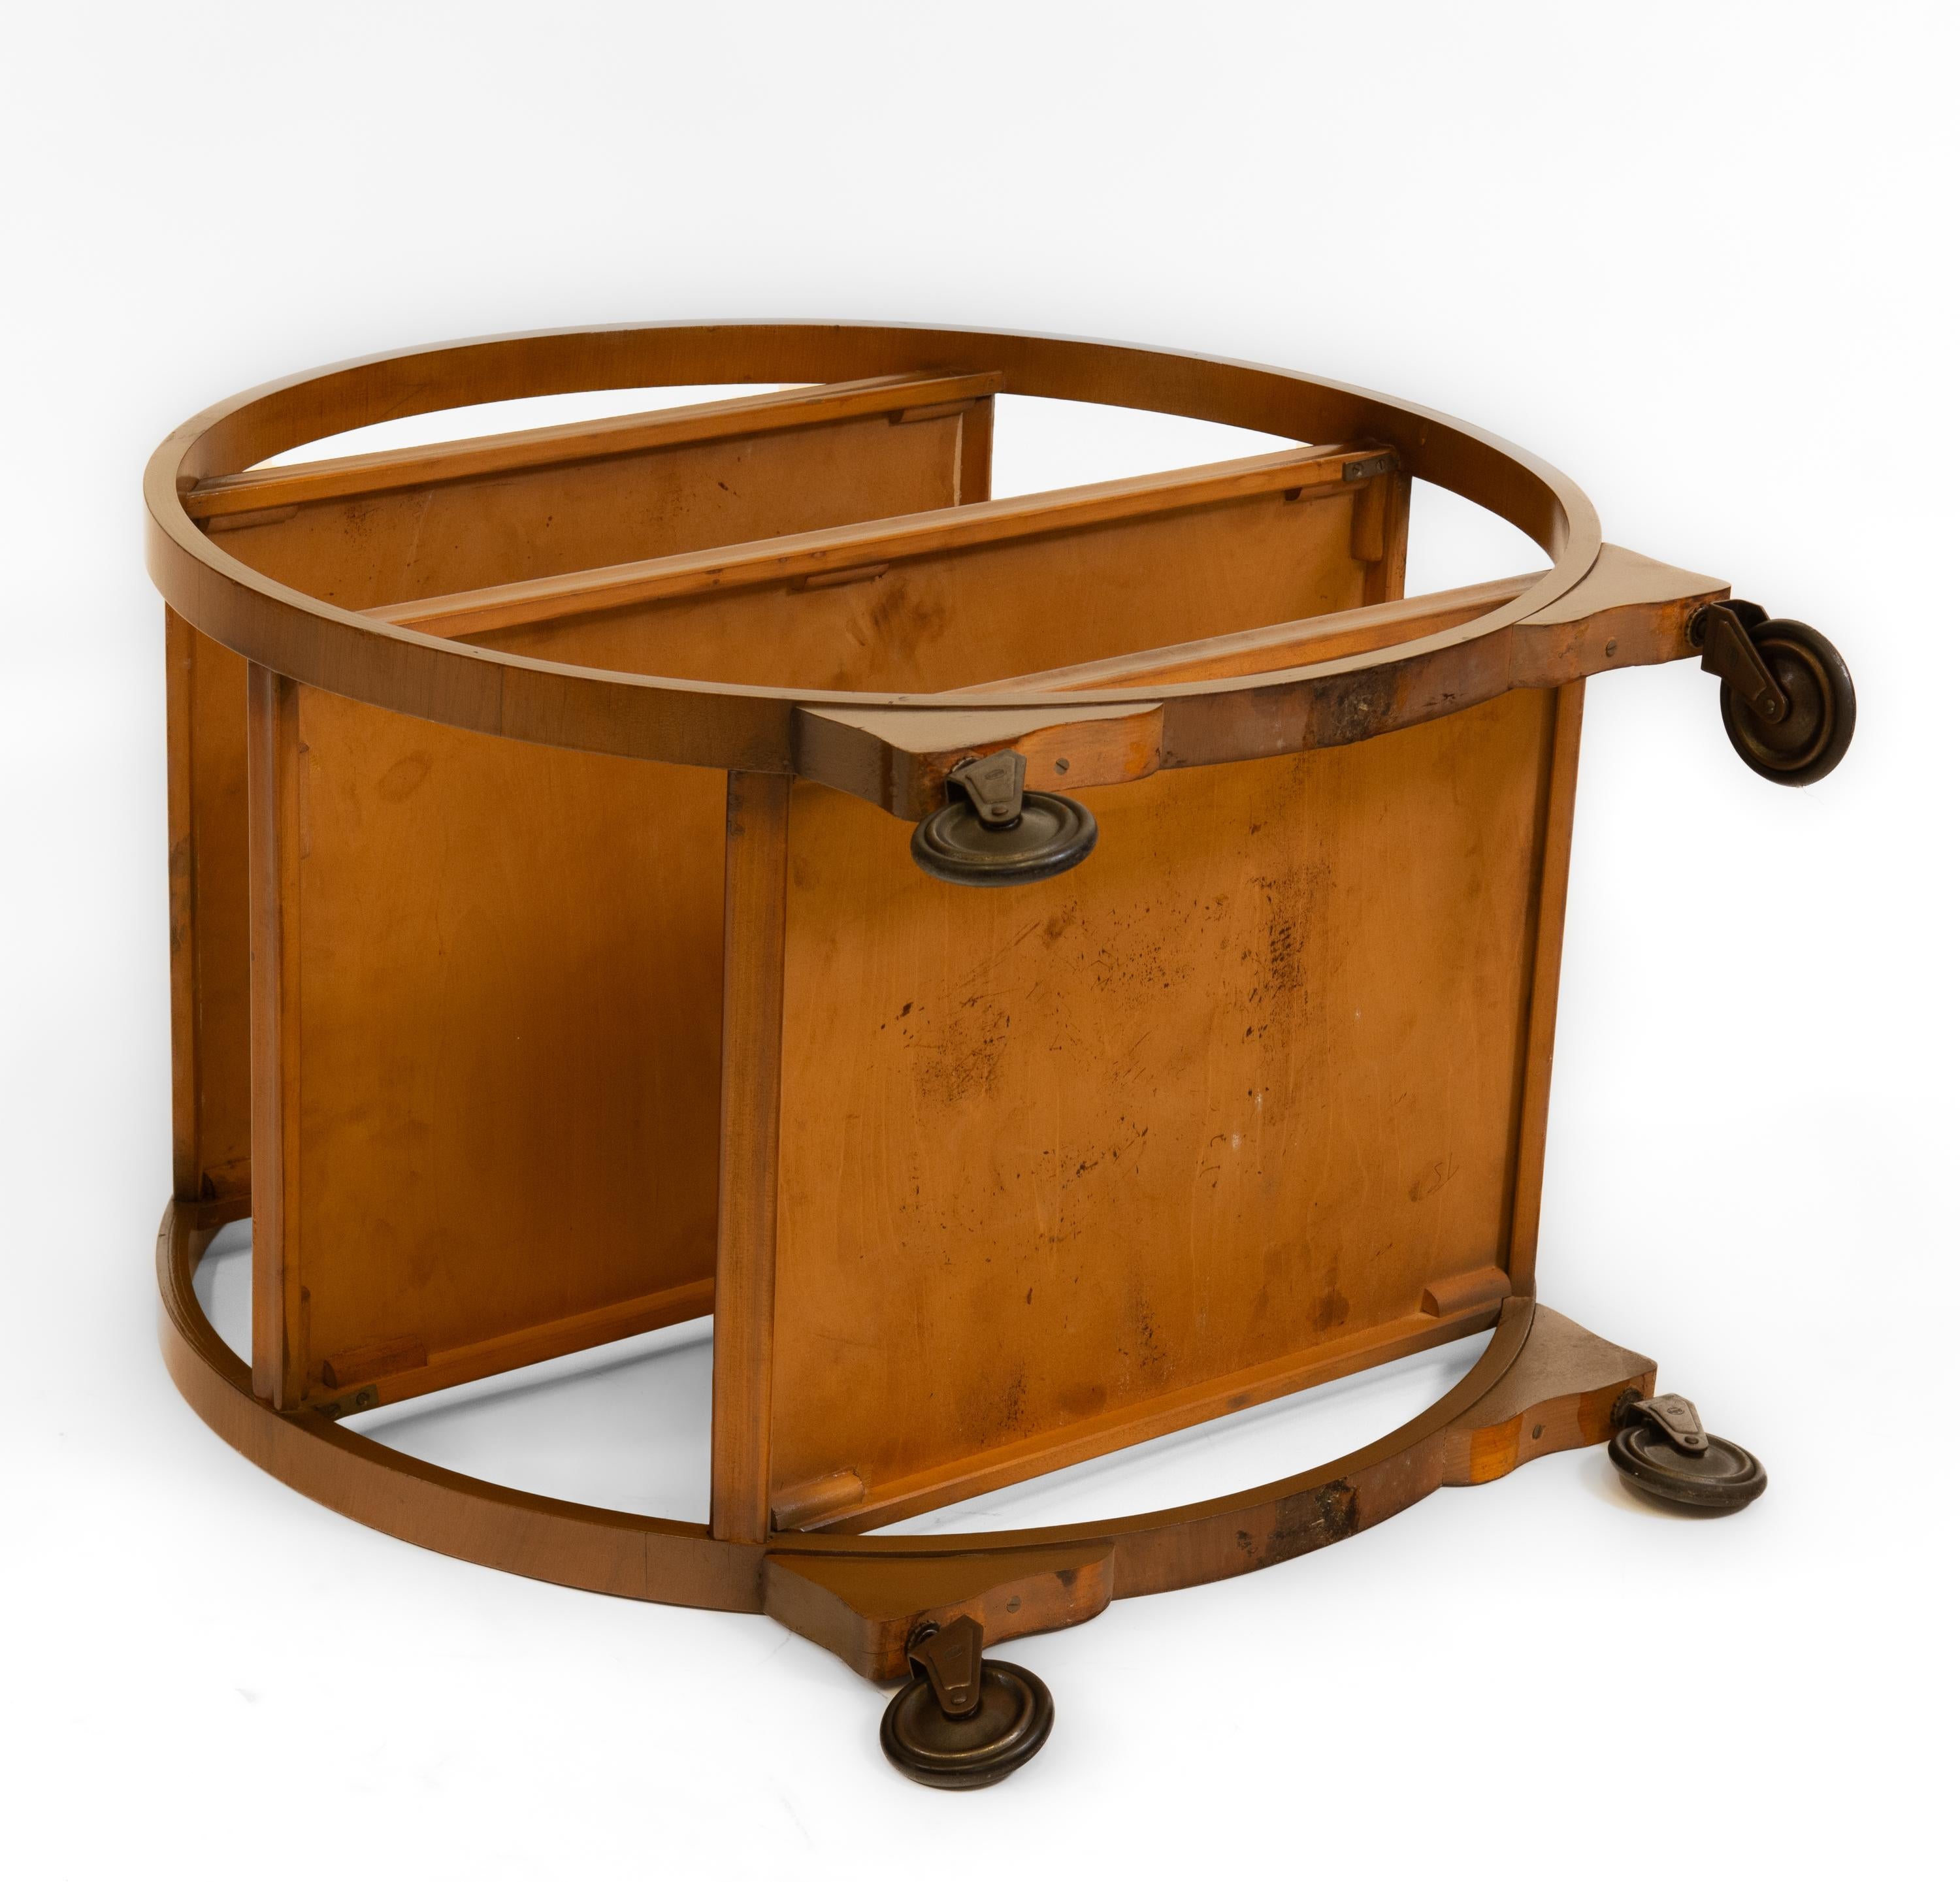 20th Century 1930s English Art Deco Walnut Round Drinks Cocktail Trolley Modernist Bar Cart For Sale